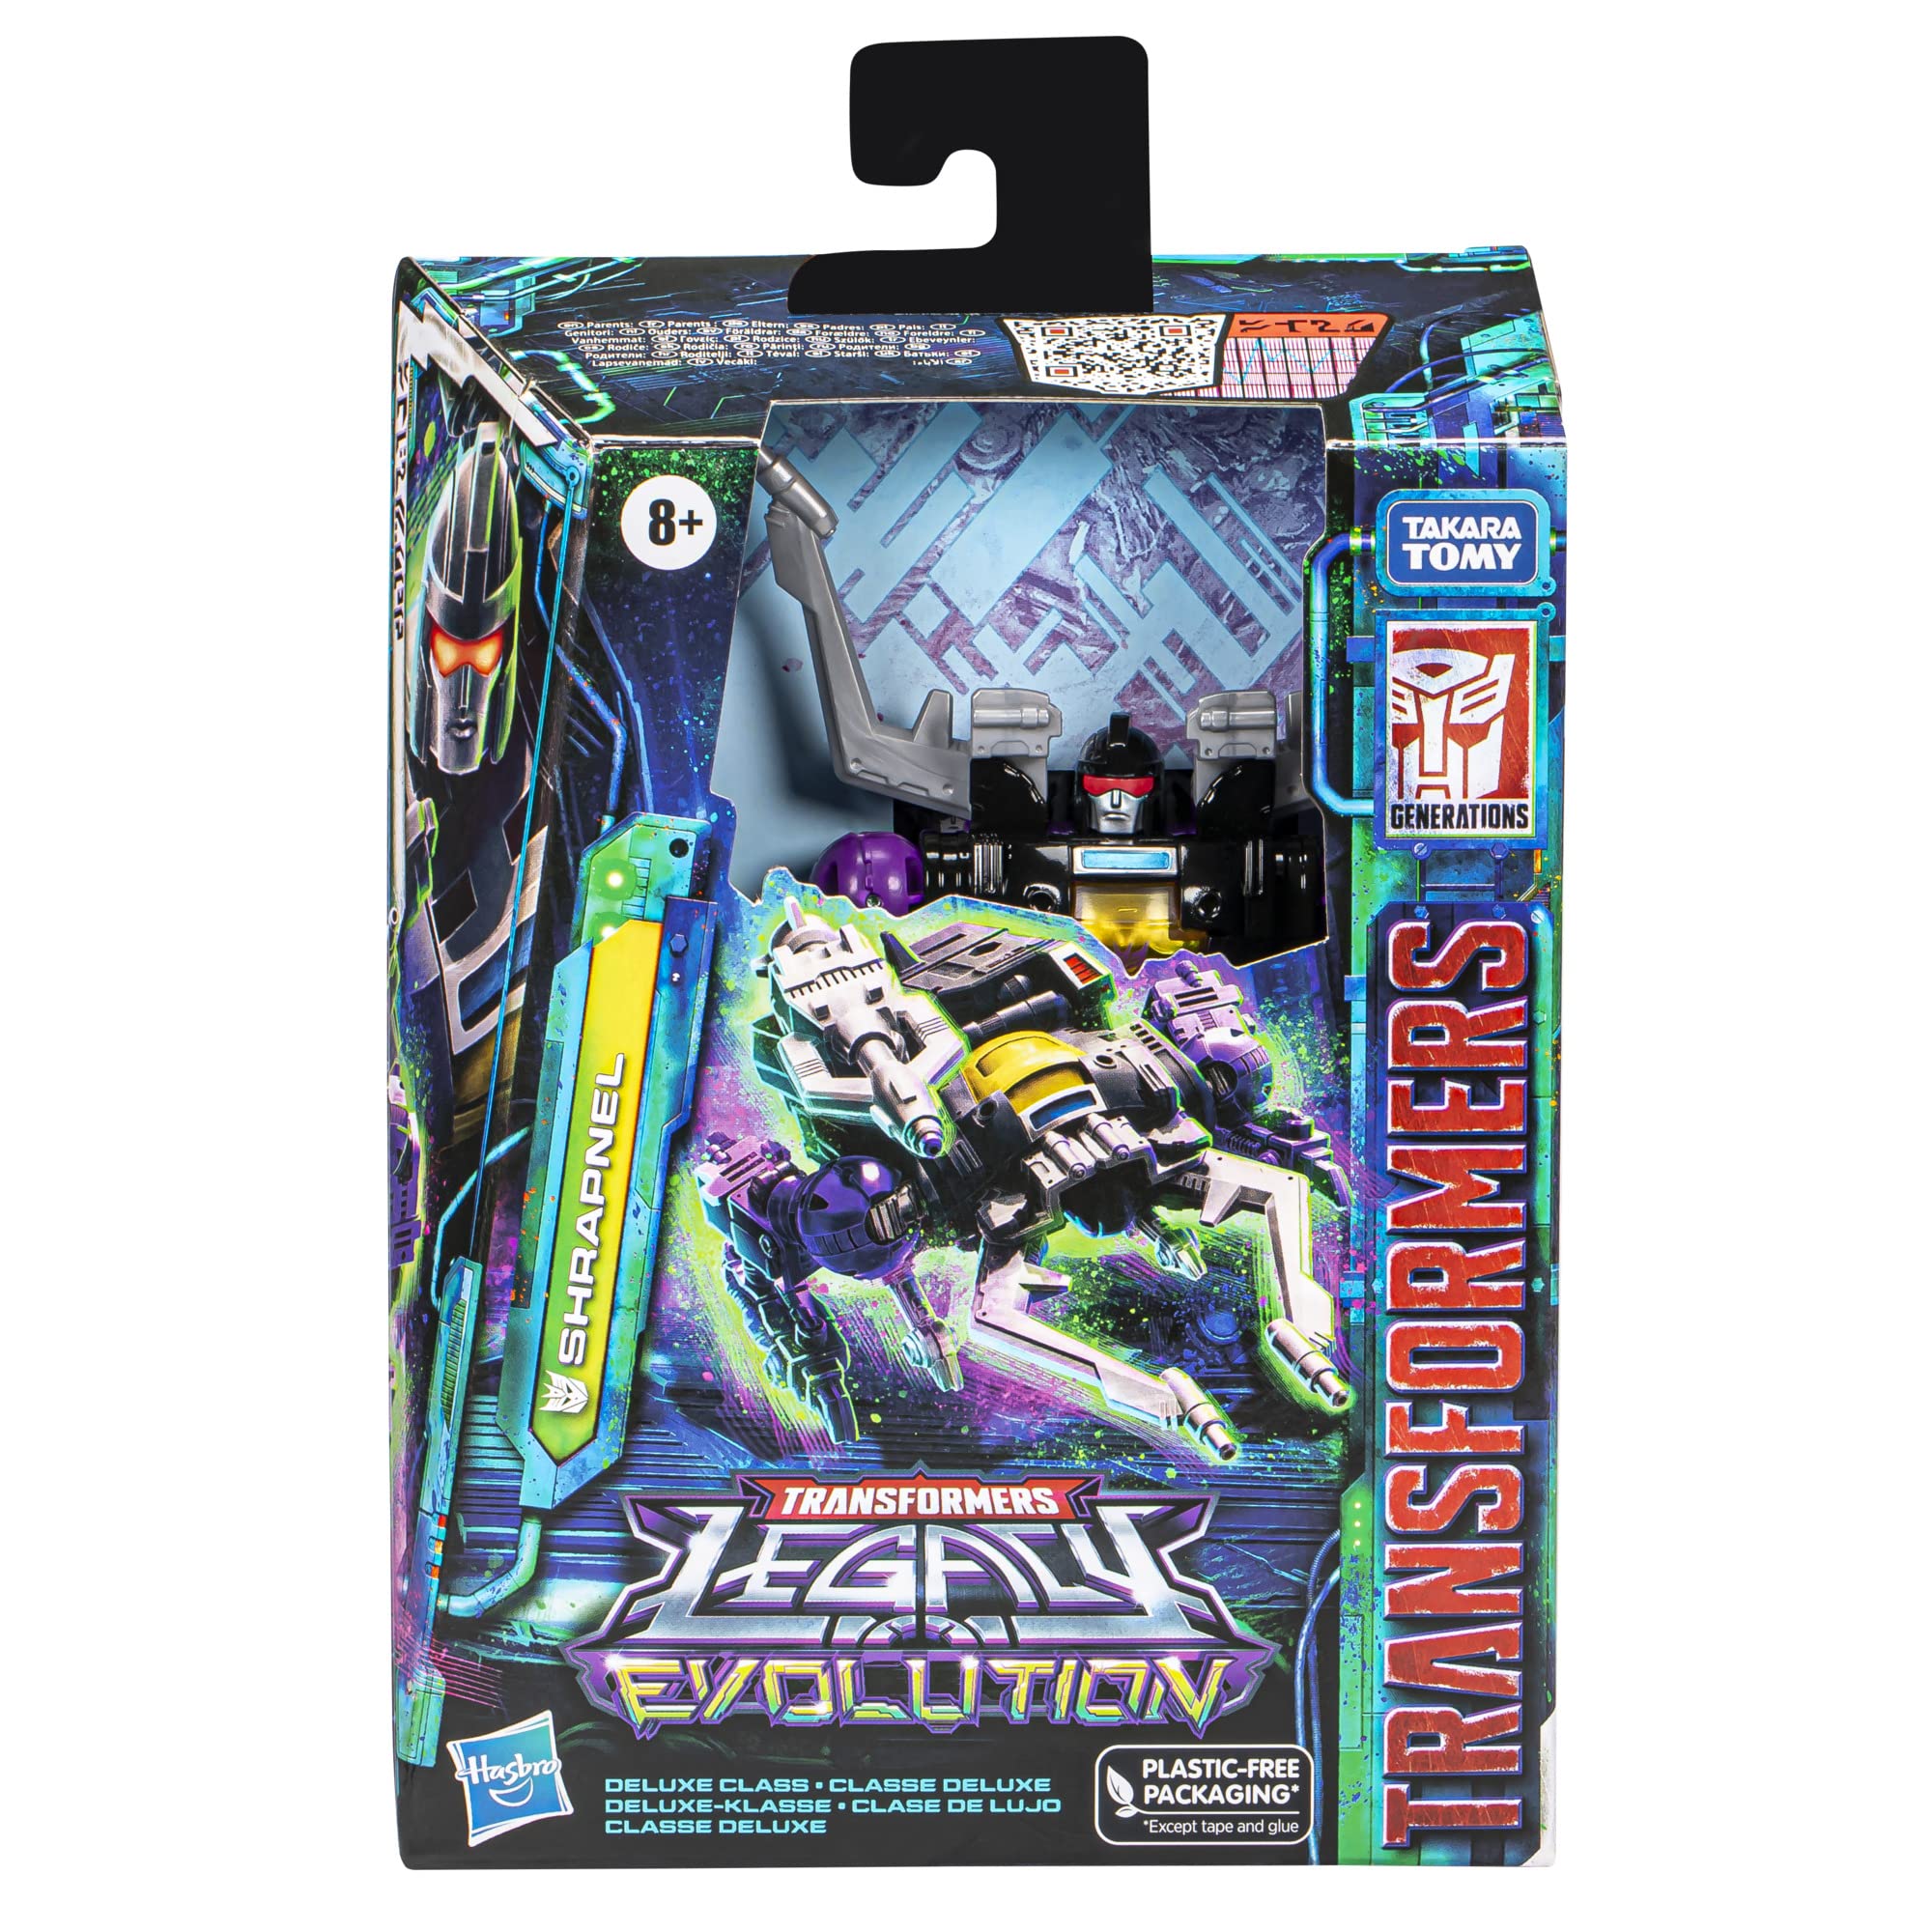 Transformers Toys Legacy Evolution Deluxe Shrapnel Toy, 5.5-inch, Action Figure for Boys and Girls Ages 8 and Up